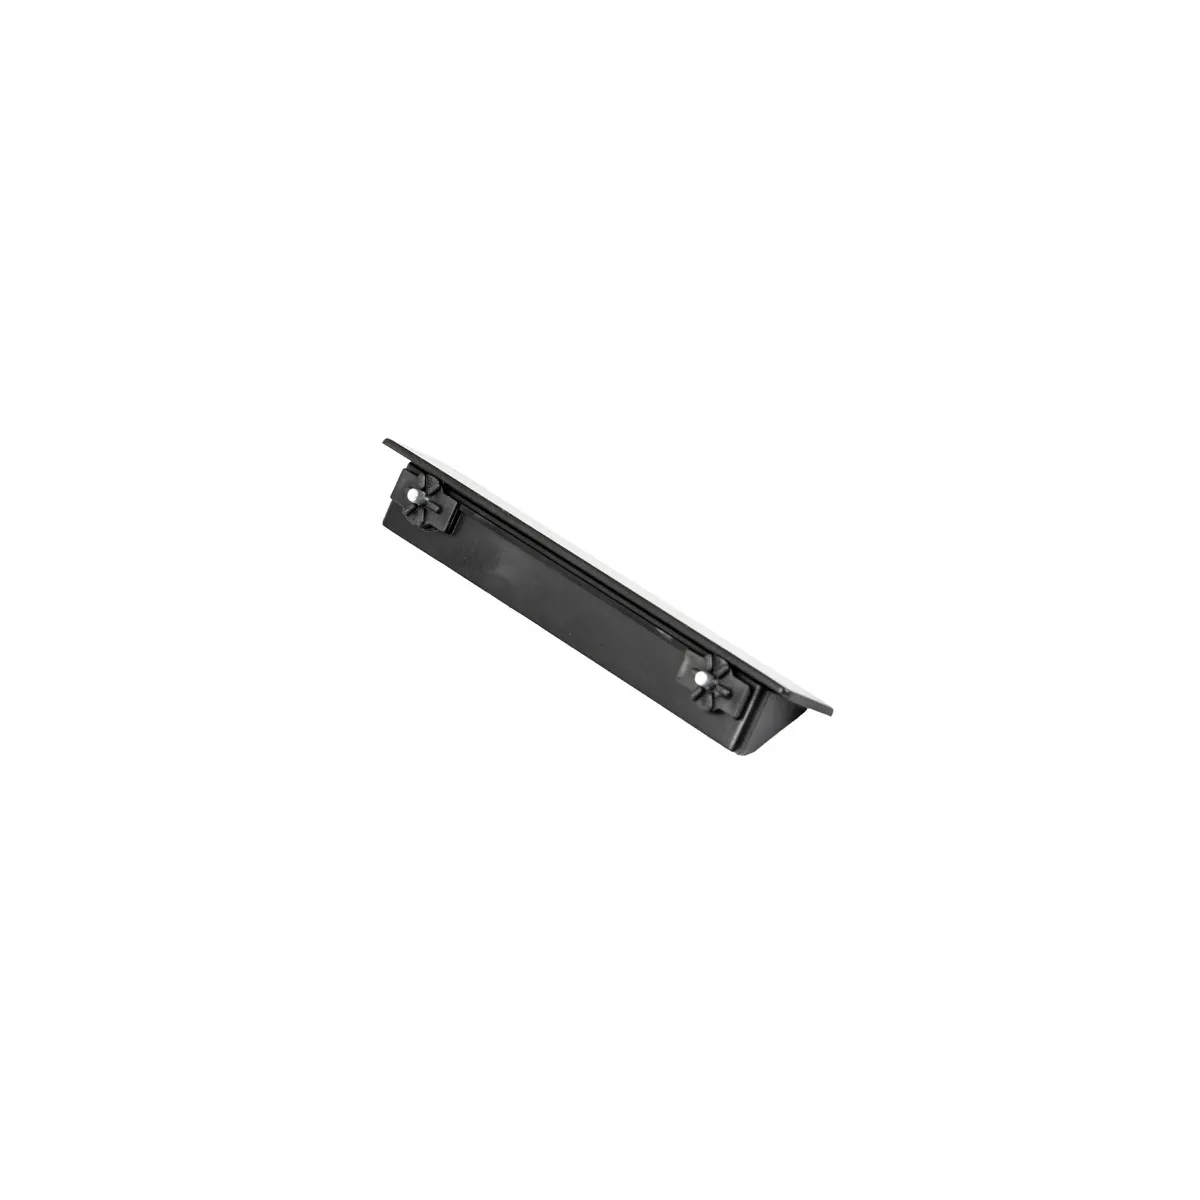 Dell Precision T7600, T7610, T7910 SFF Adapter for HDD Caddy